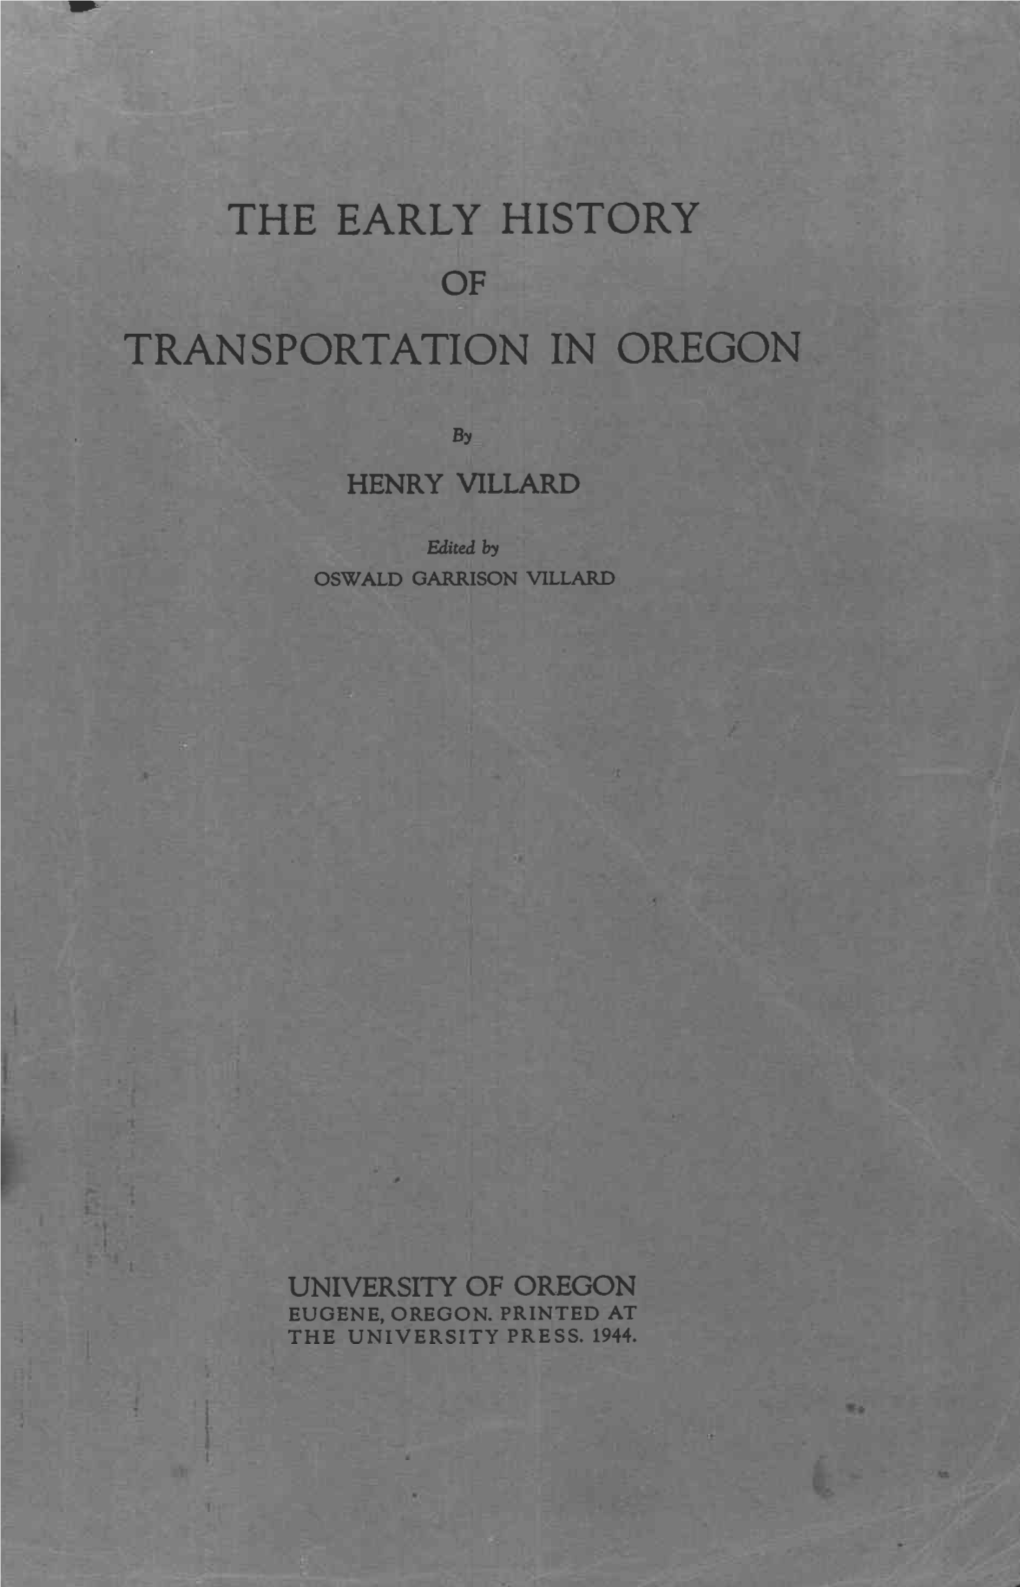 The Early History of Transportation in Oregon